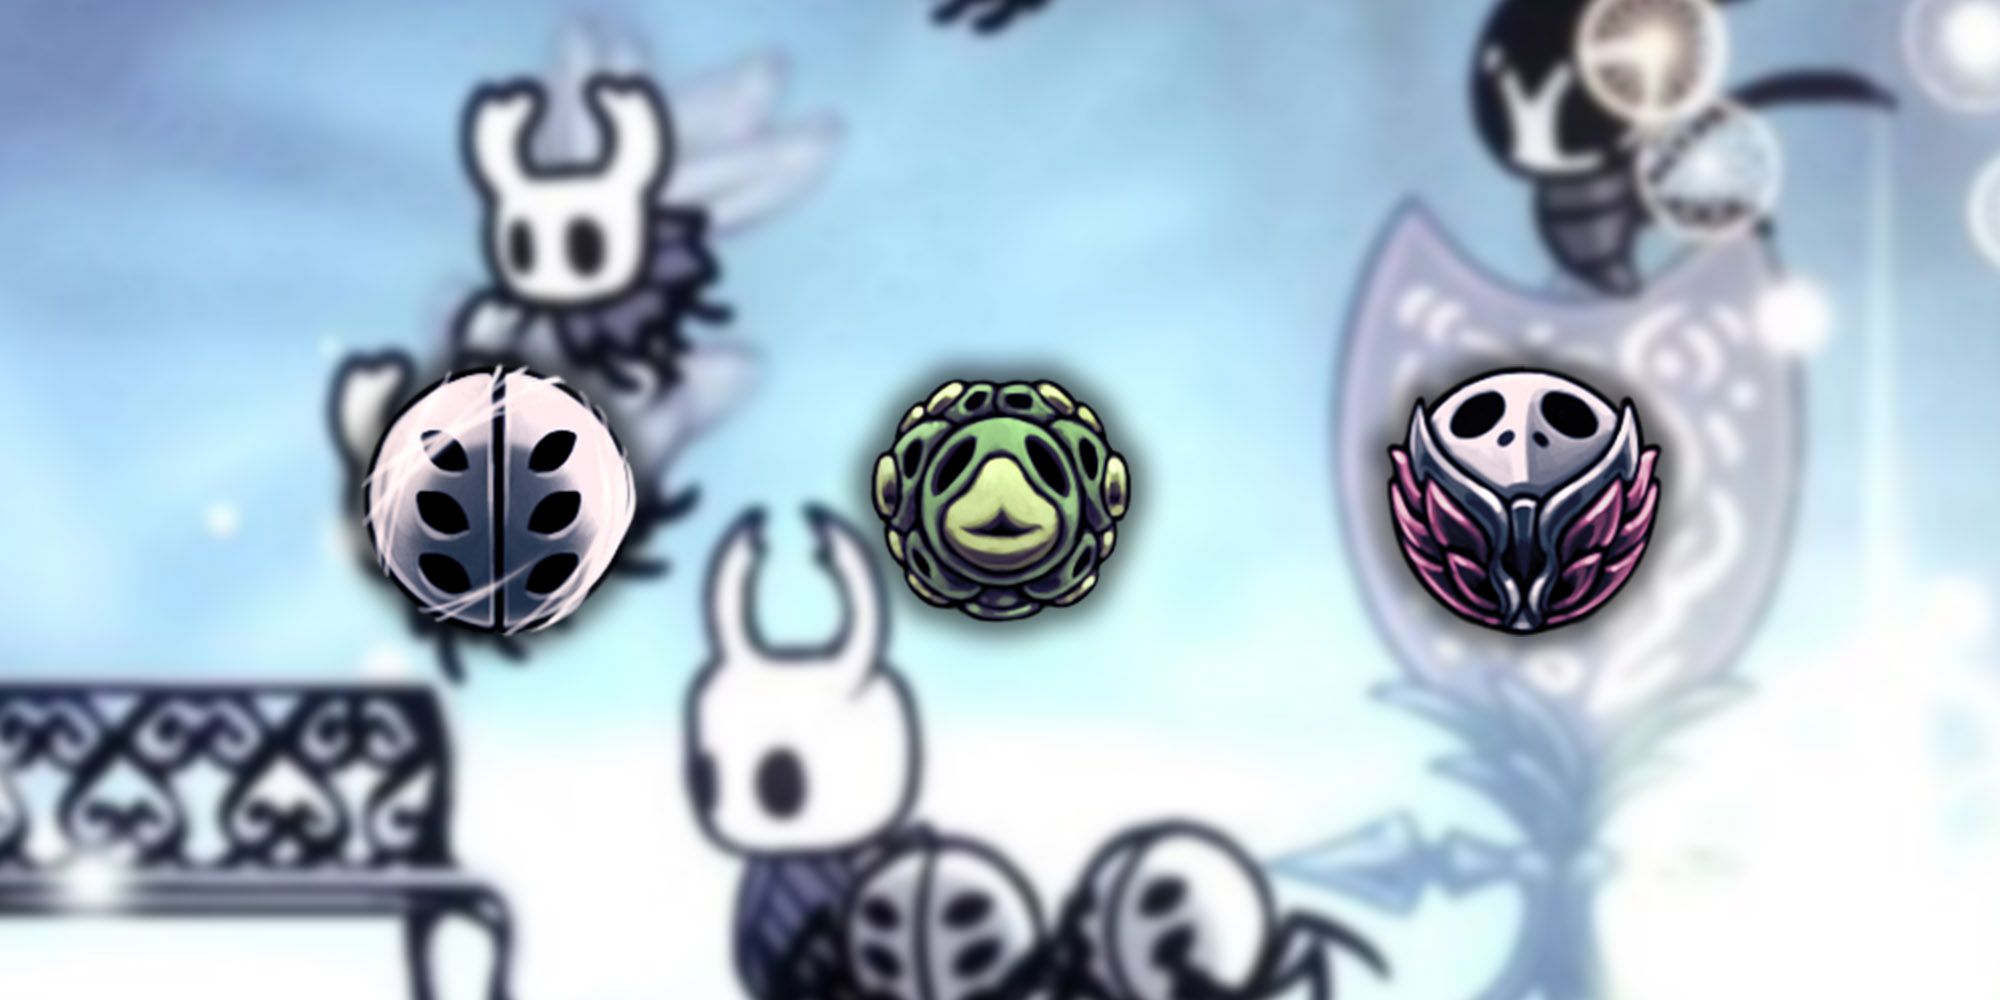 hollow knight collect all charms